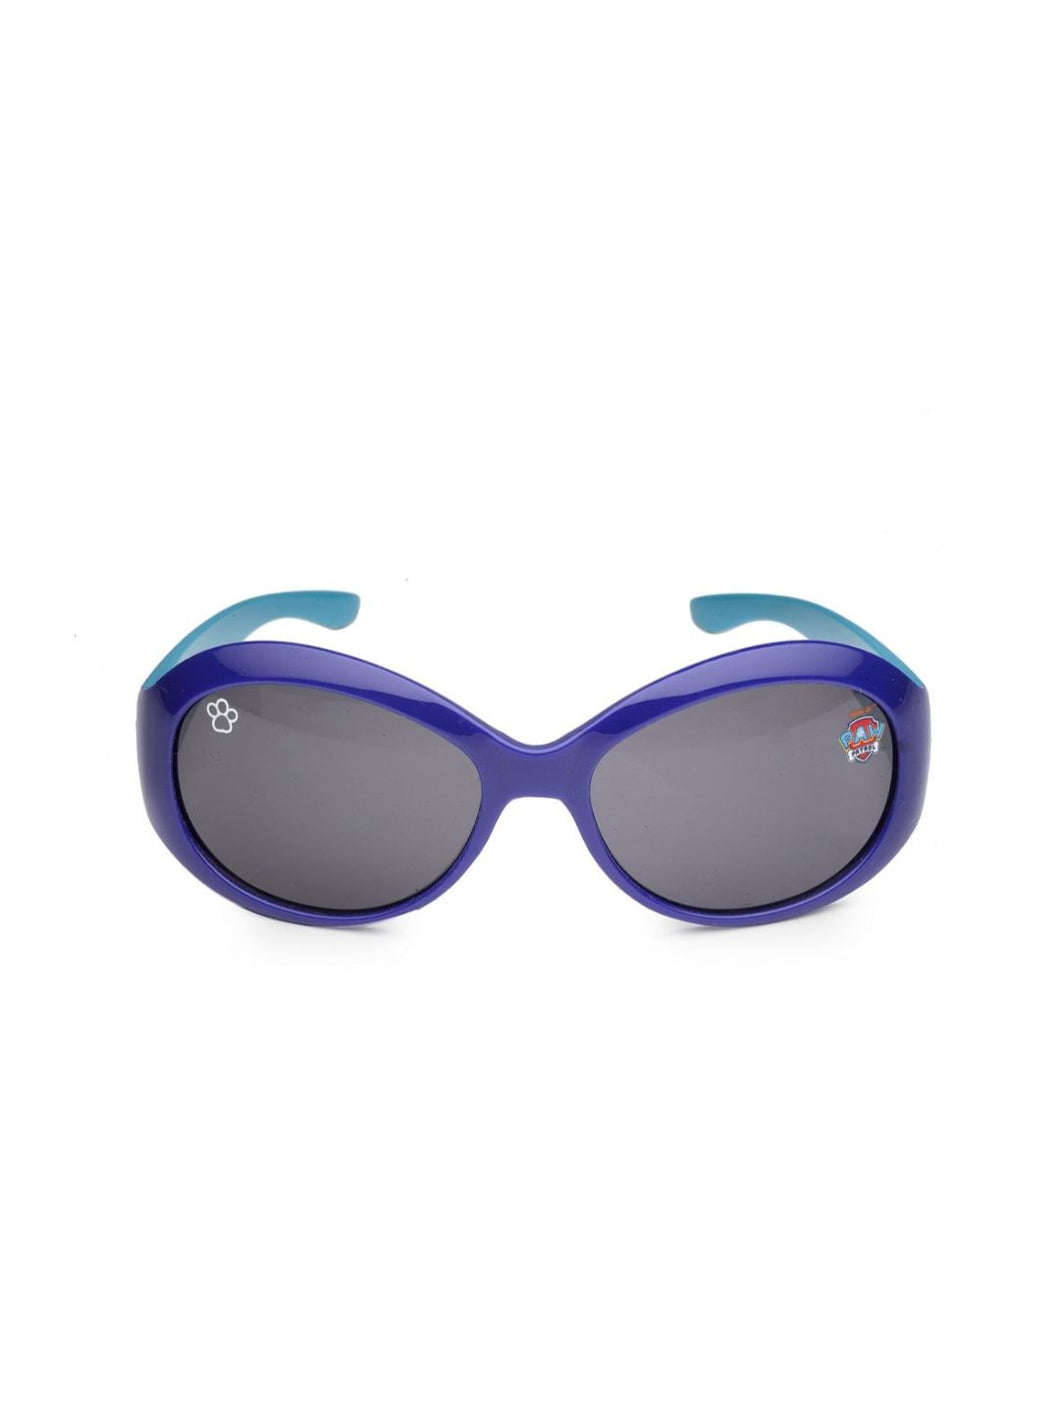 Stol'n Kids Yellow and Blue Bow Applique Rectangular Sunglasses:Yellow and Blue Pink and Green